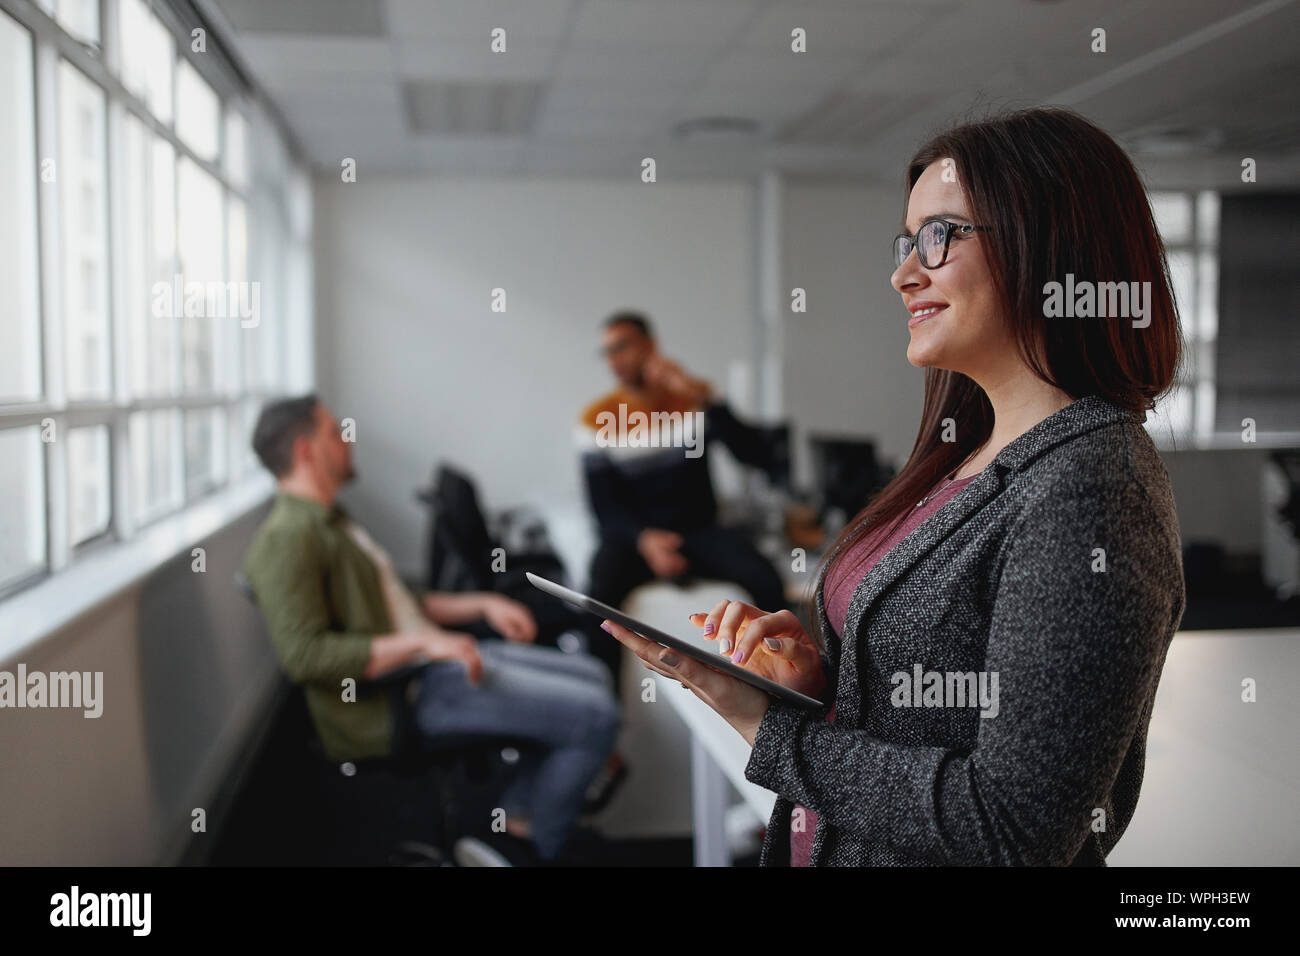 Thoughtful young businesswoman looking away while holding digital tablet in front of colleagues relaxing in office at background Stock Photo